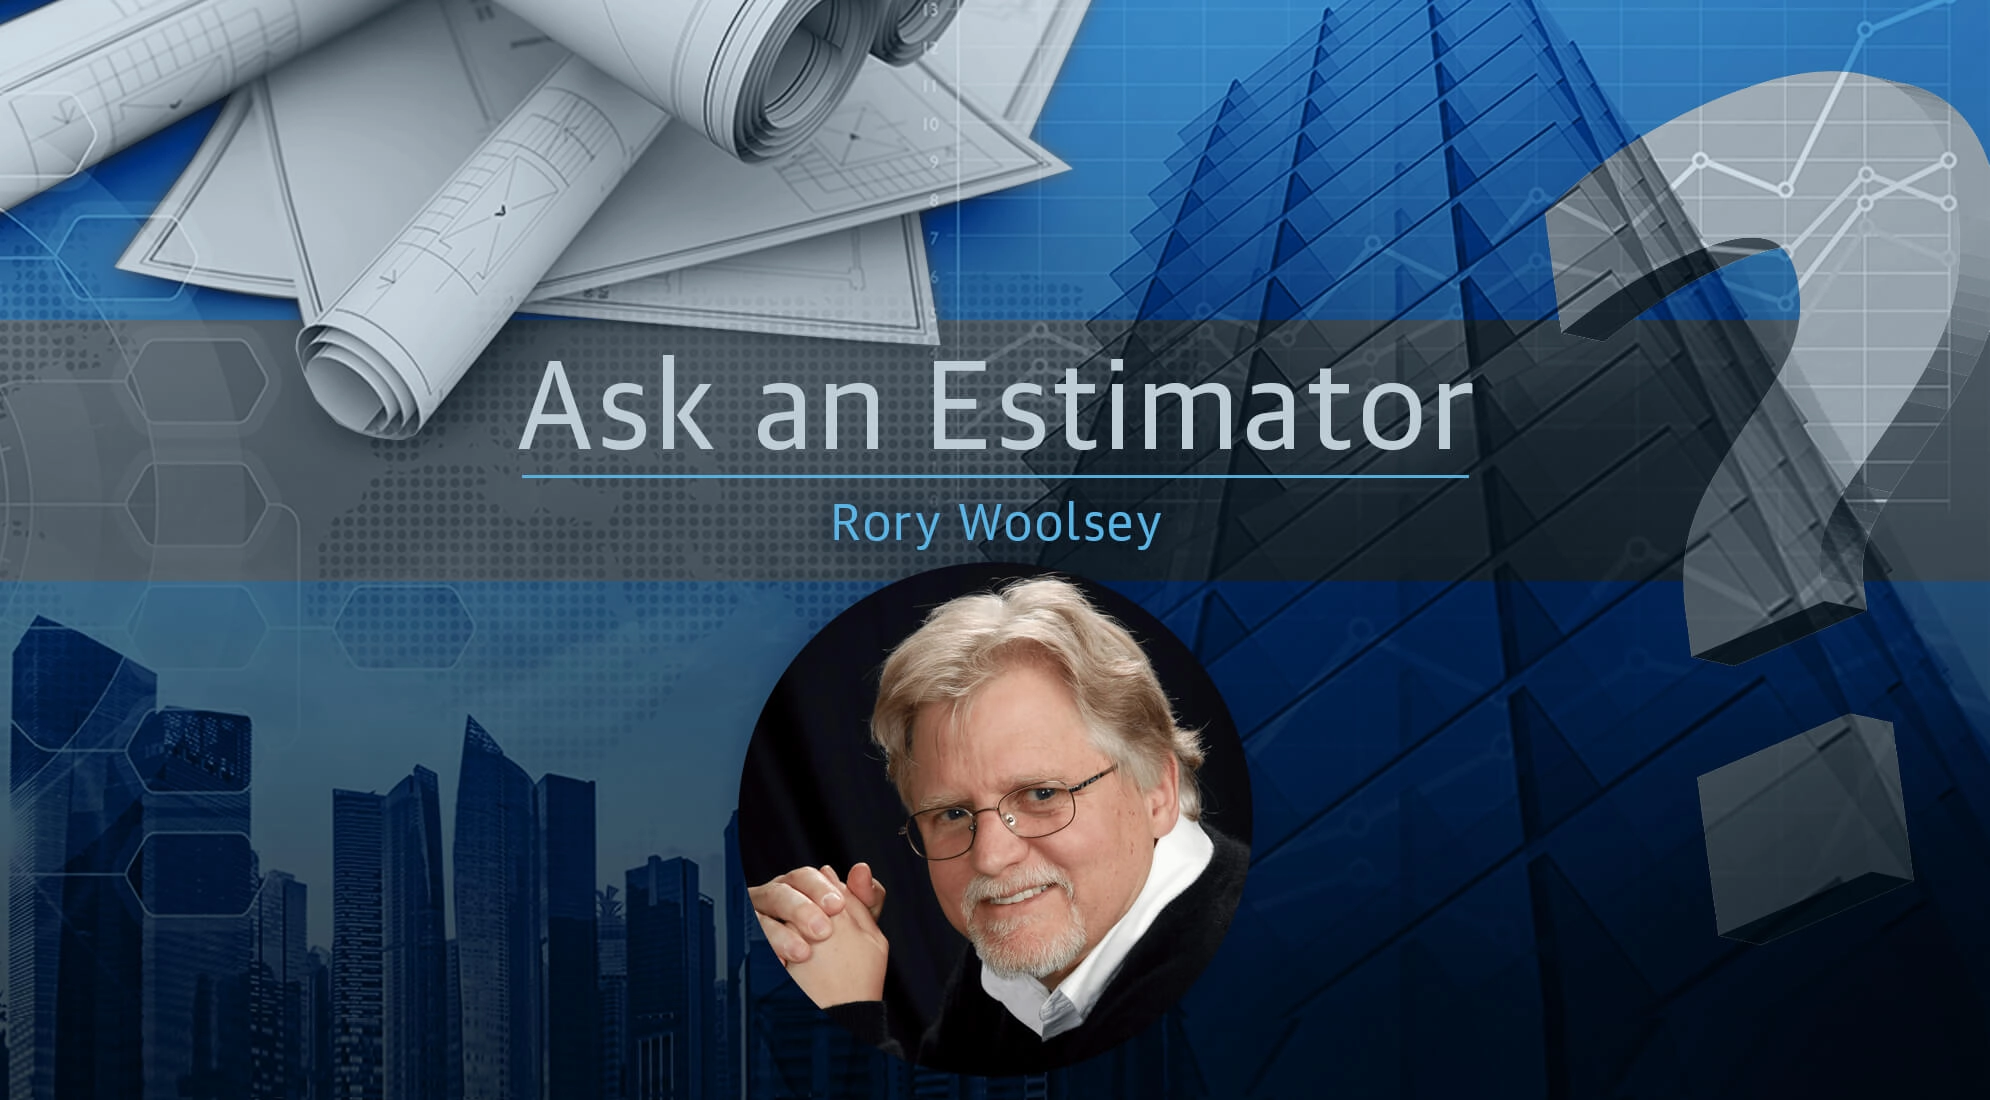 Ask an Estimator: Answers from Rory Woolsey